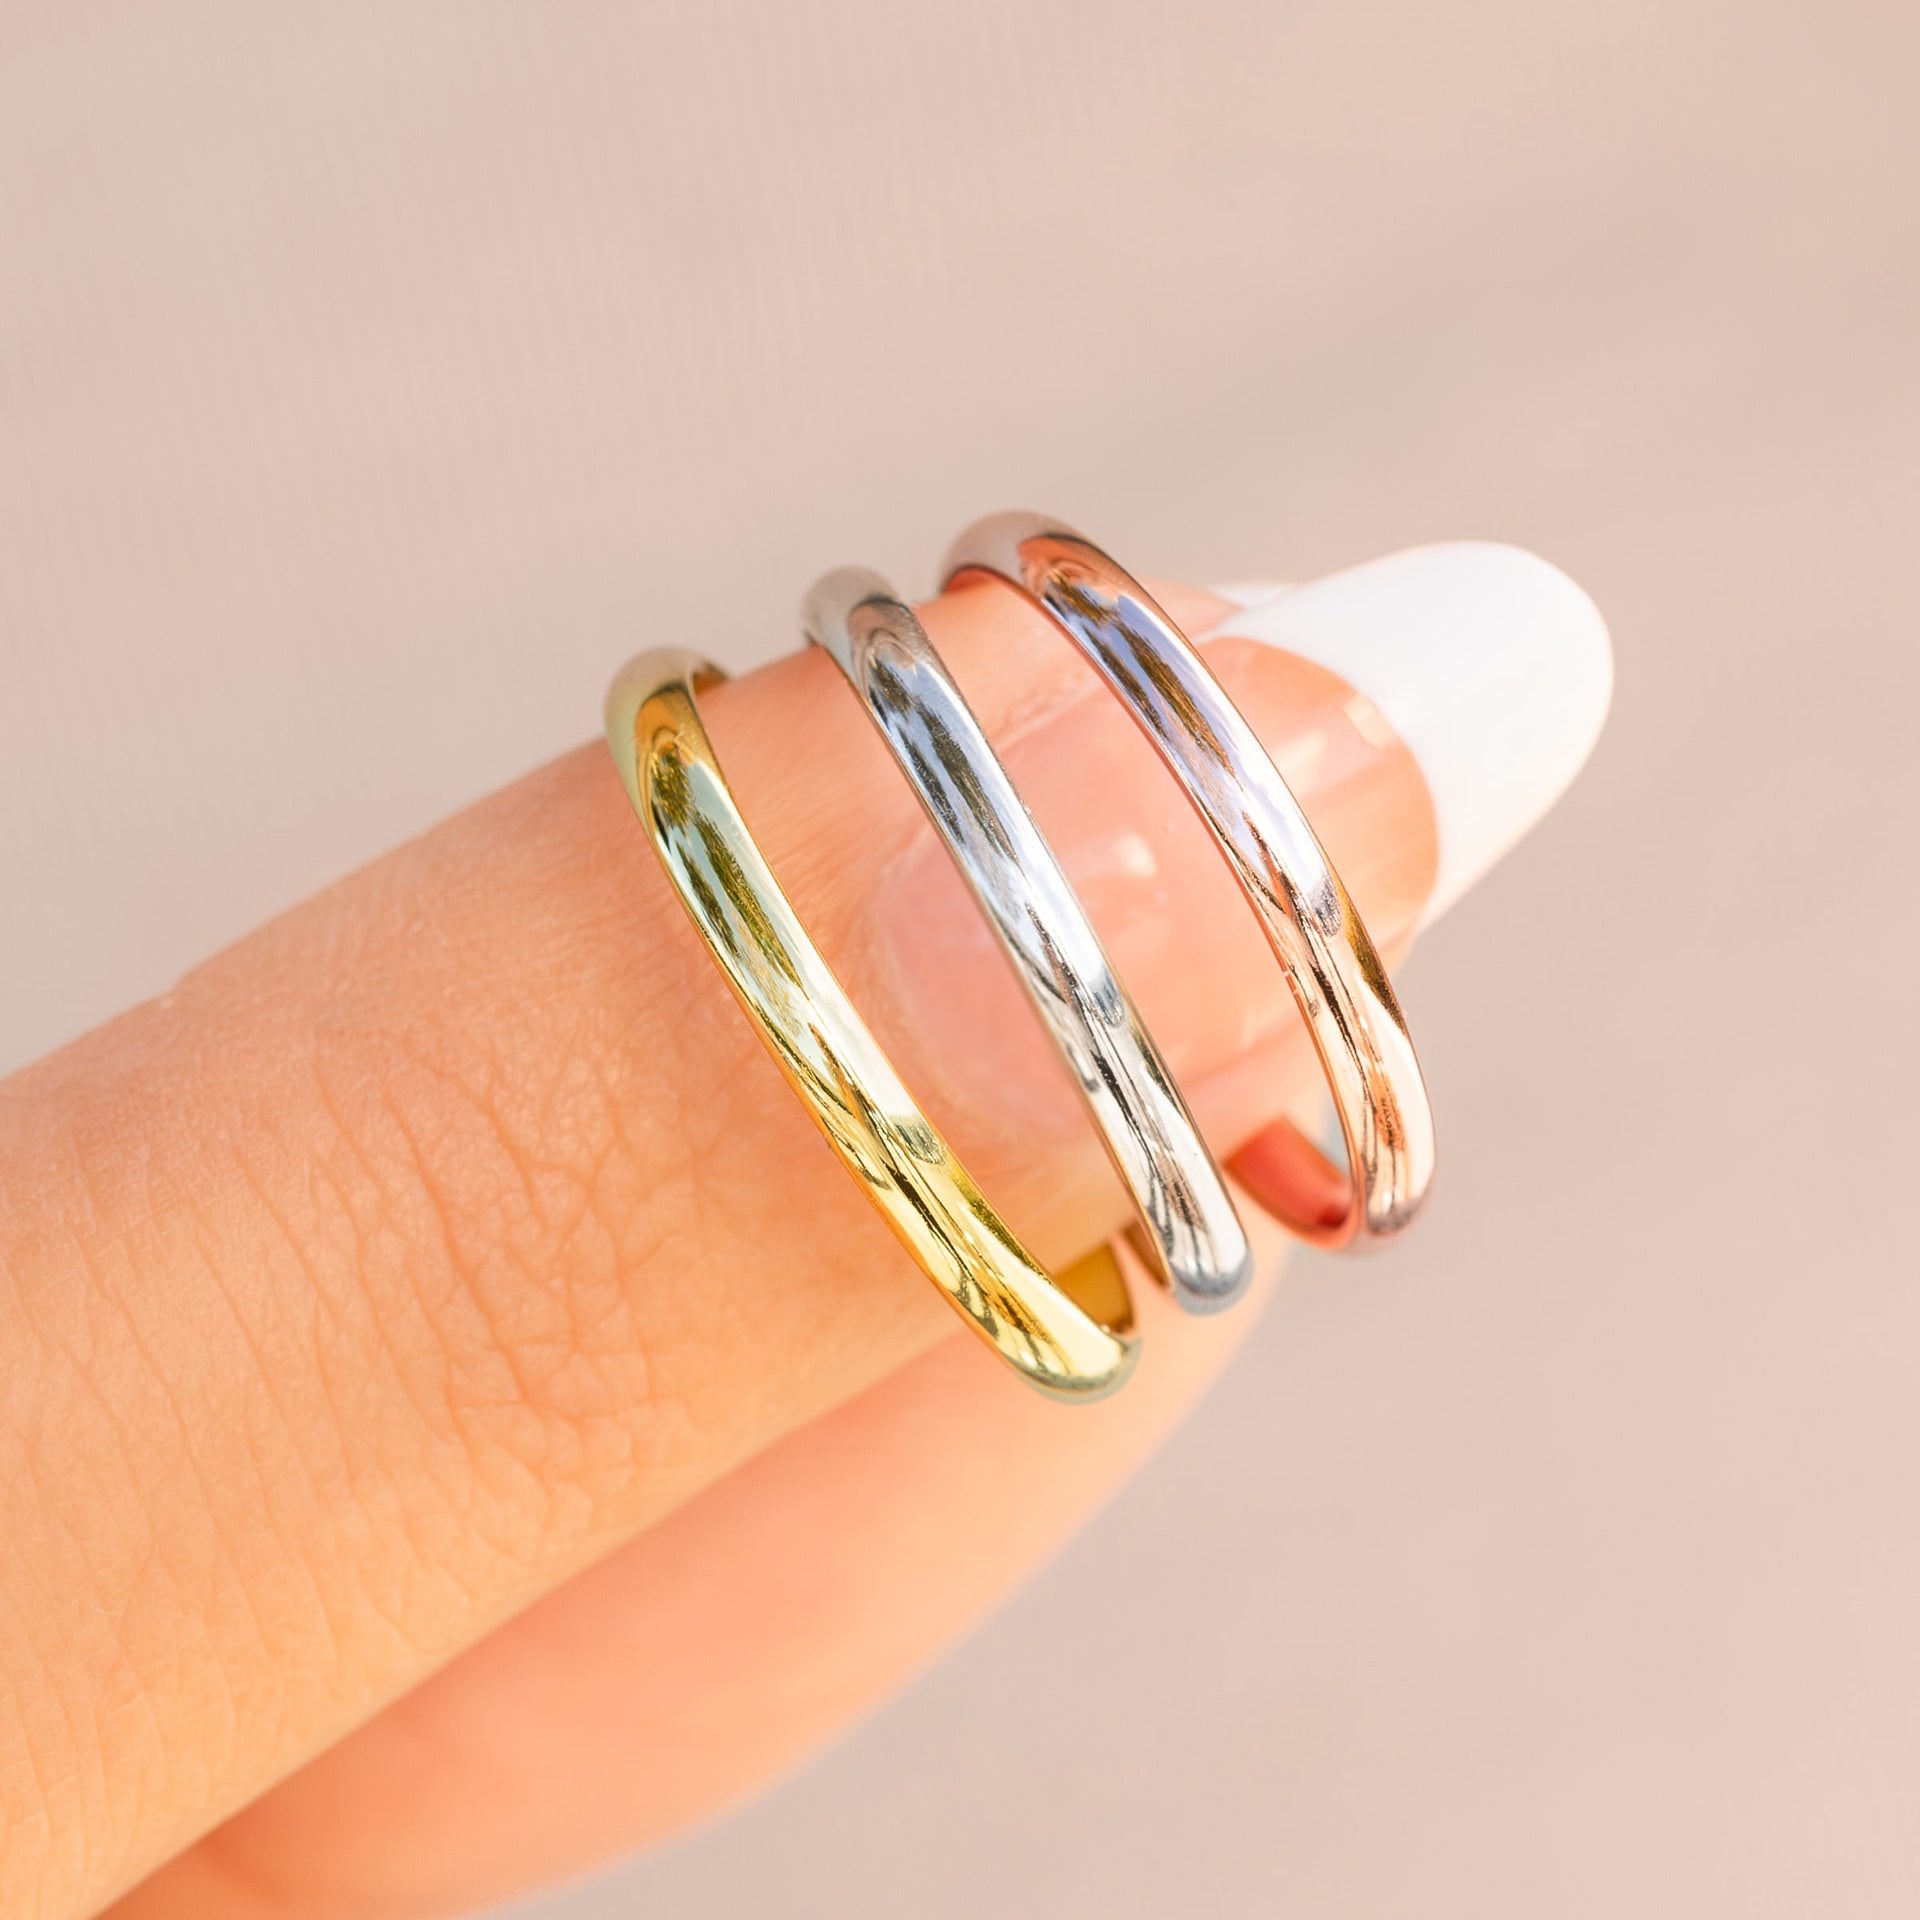 Slim Minimal wedding bands in Gold, Silver and Rose Gold